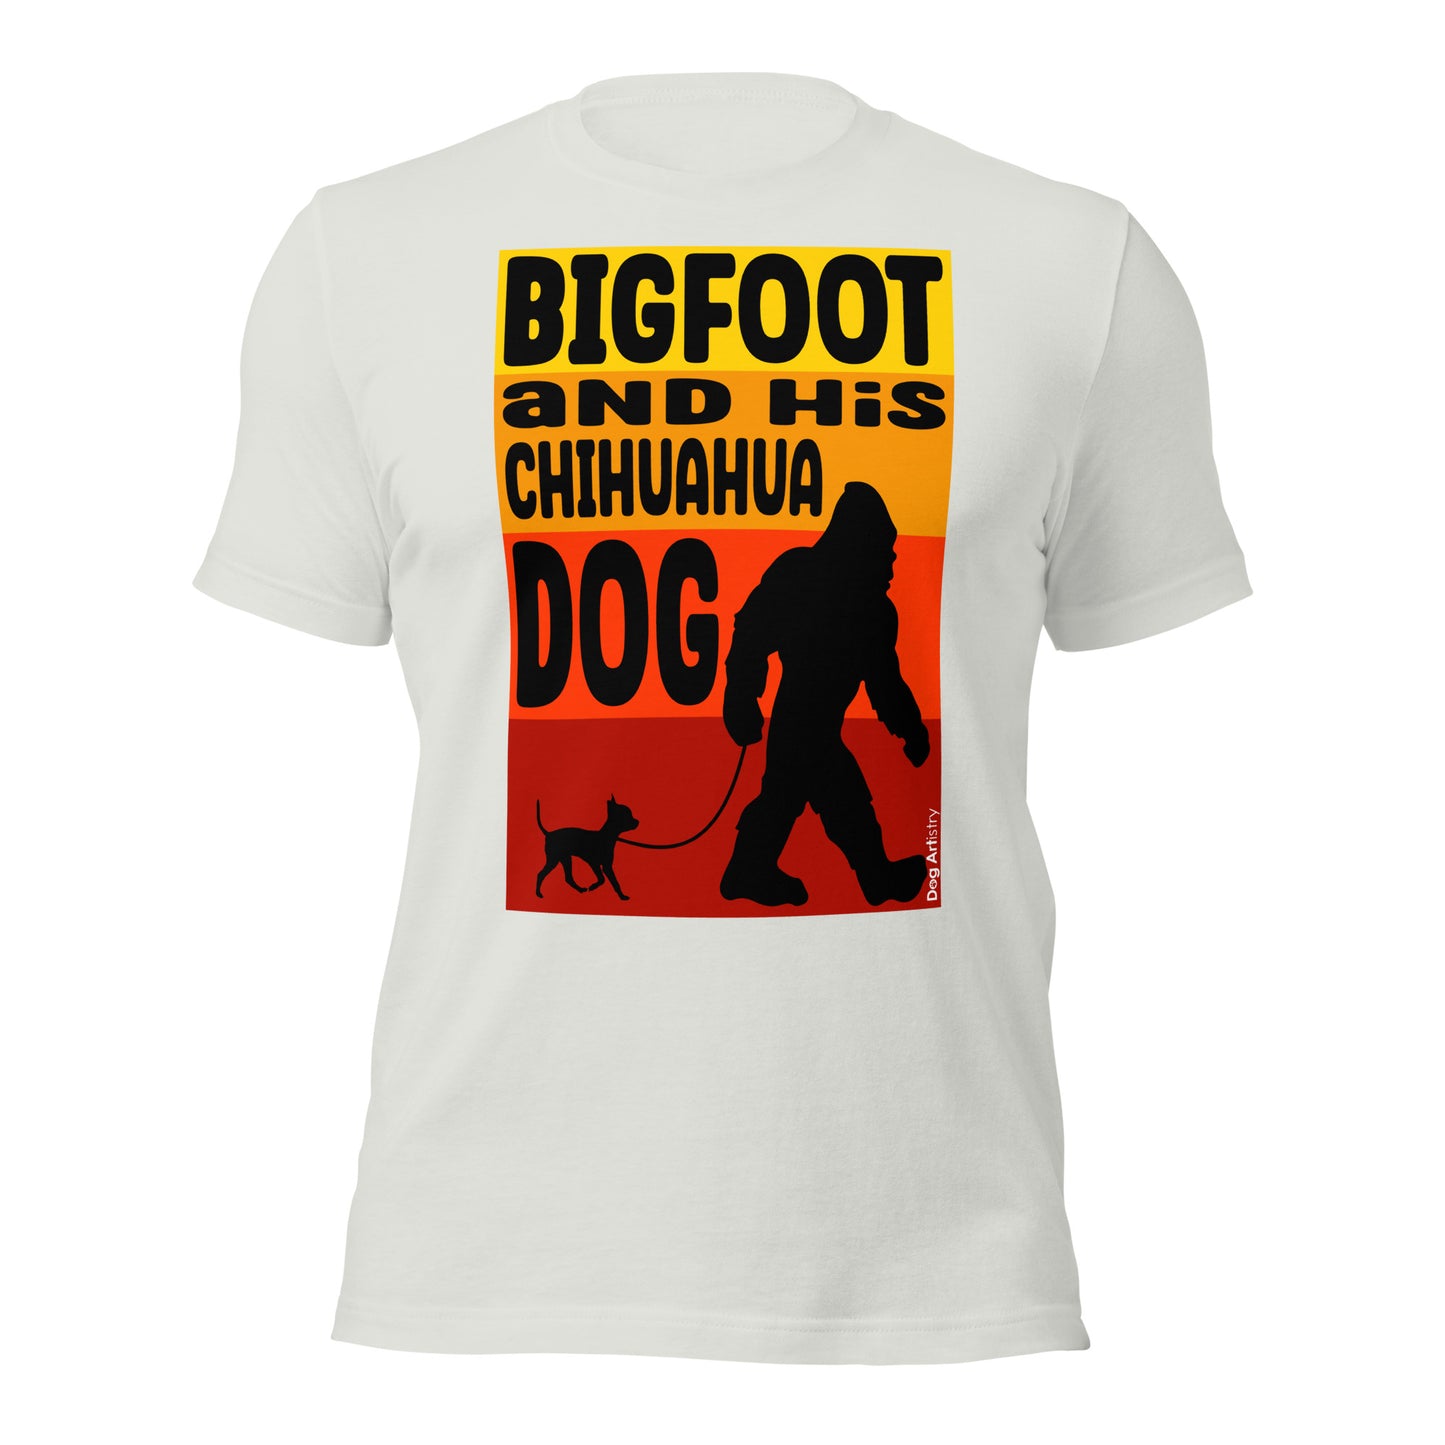 Big foot and his Chihuahua dog unisex silver t-shirt by Dog Artistry.